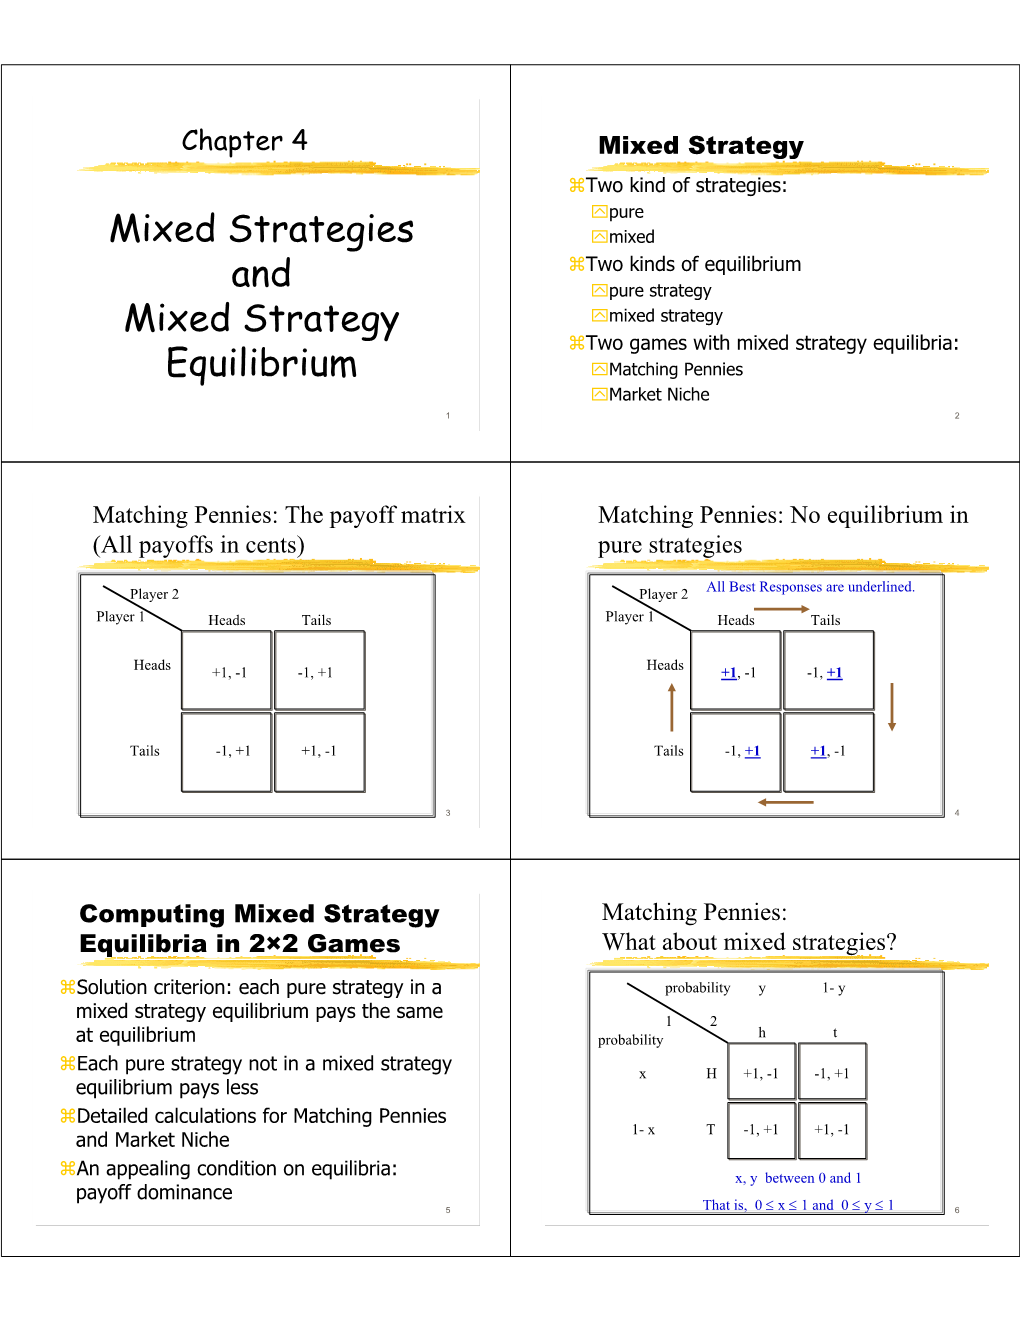 Chap 4. Mixed Strategy Equilibrium